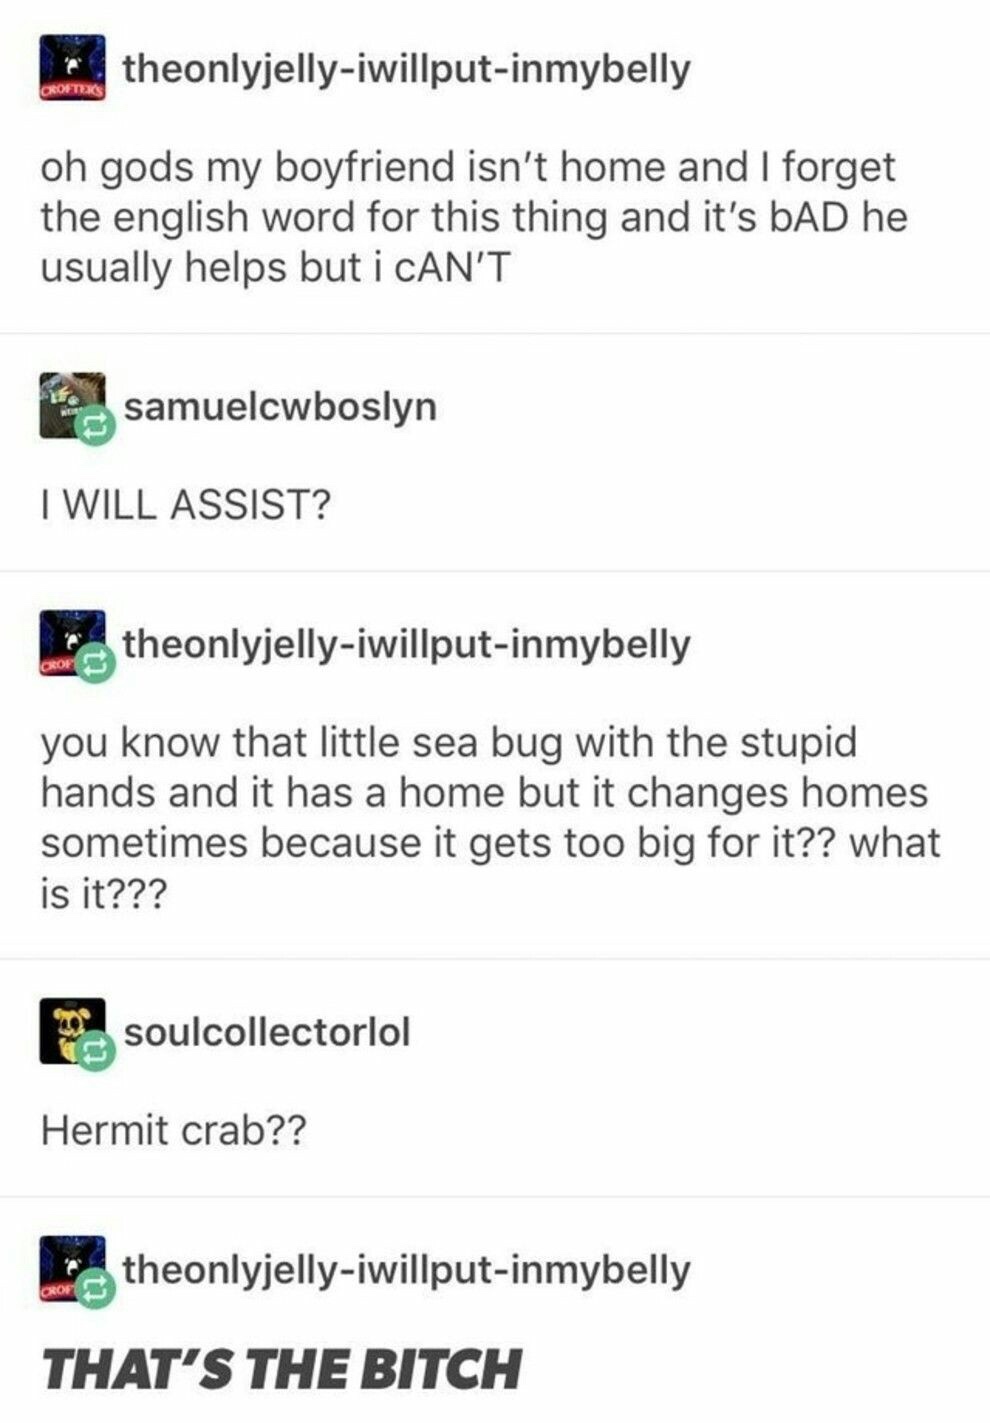 horny tumblr posts - theonlyjellyiwillputinmybelly oh gods my boyfriend isn't home and I forget the english word for this thing and it's bAD he usually helps but i Can'T samuelcwboslyn I Will Assist? theonlyjellyiwillputinmybelly you know that little sea 